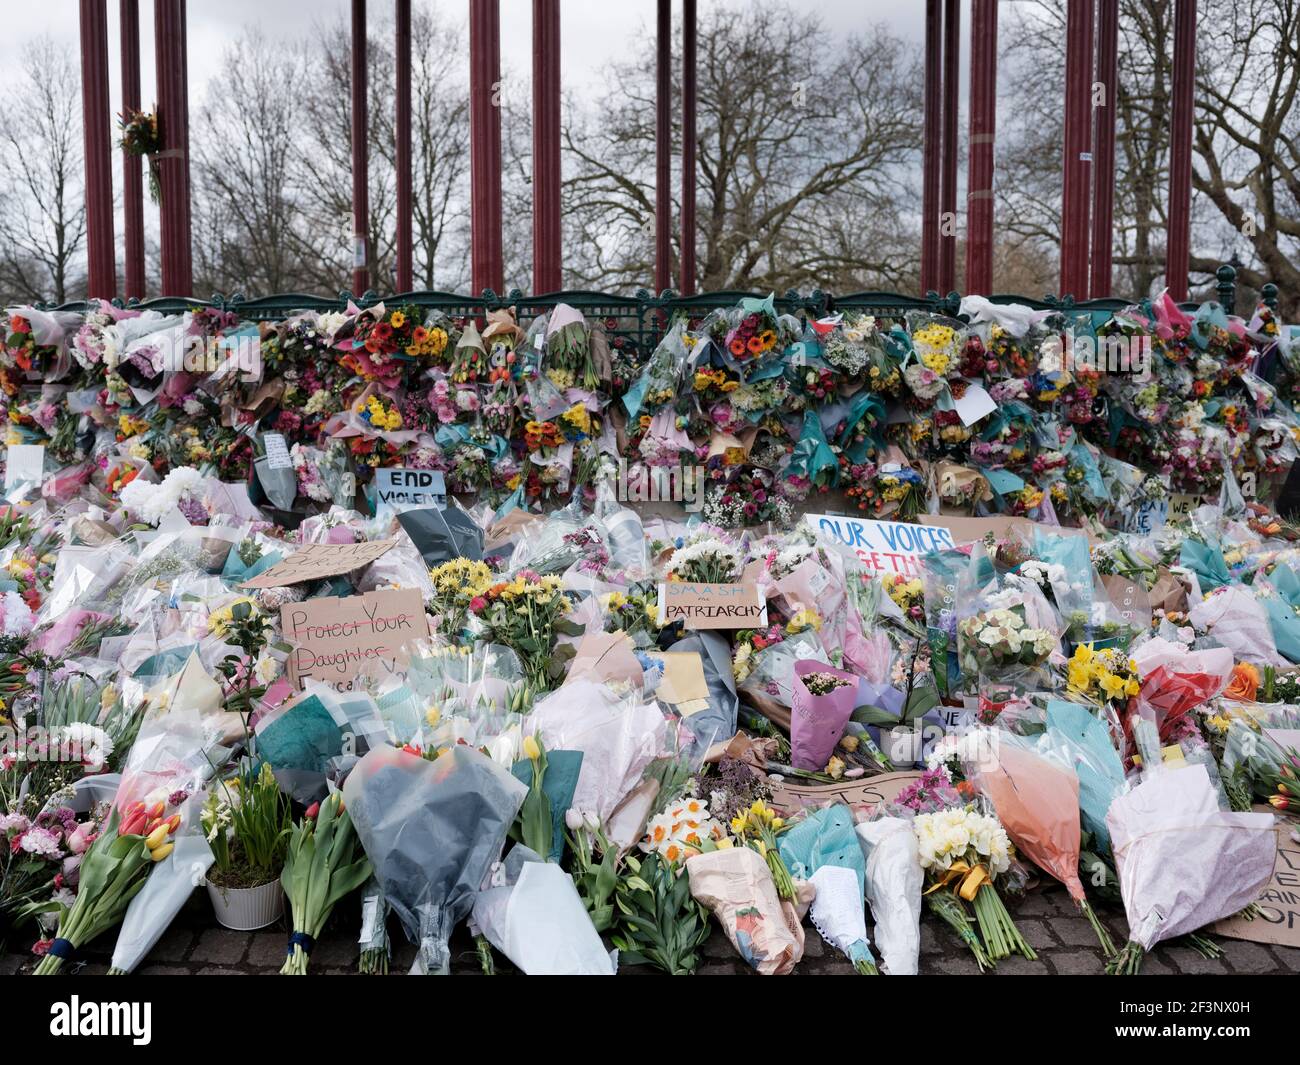 Flowers, candles and messages left by mourners of Sarah Everard at the bandstand in Clapham Common, March 14, 2021. Stock Photo